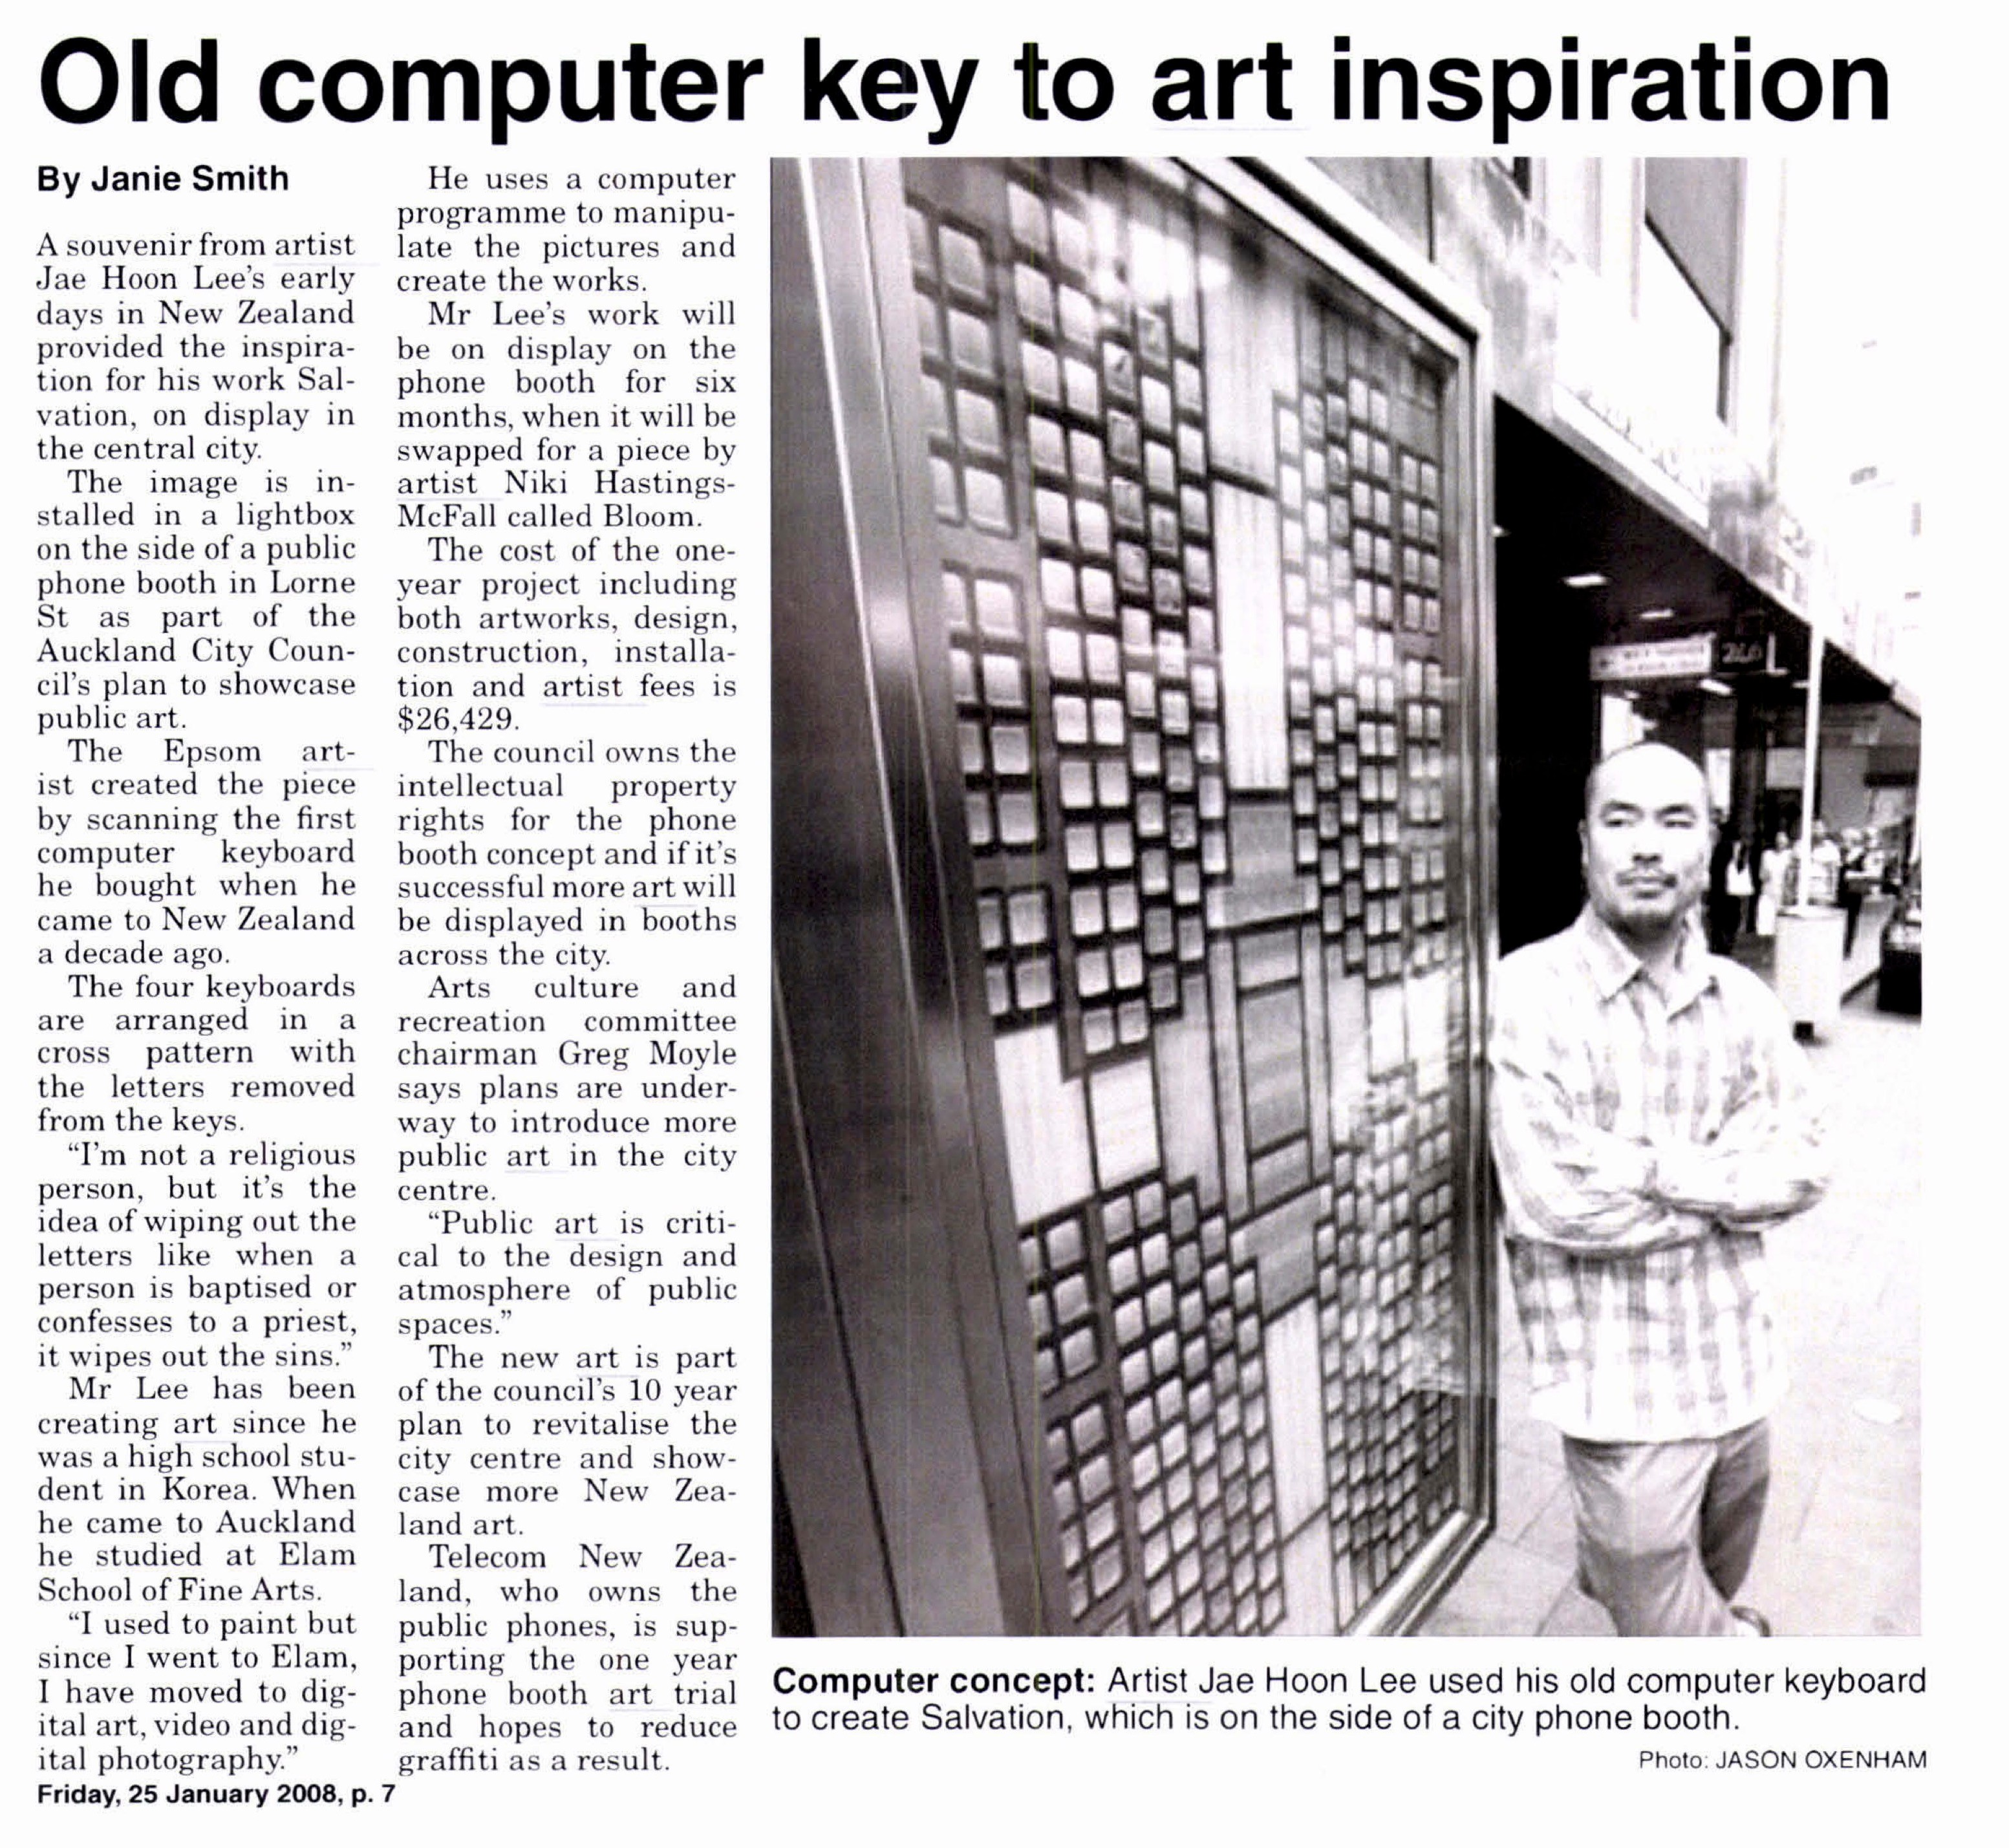 Newspaper clipping with photo of the artist leaning against a telephone booth with their computer keyboard artwork displayed inside.